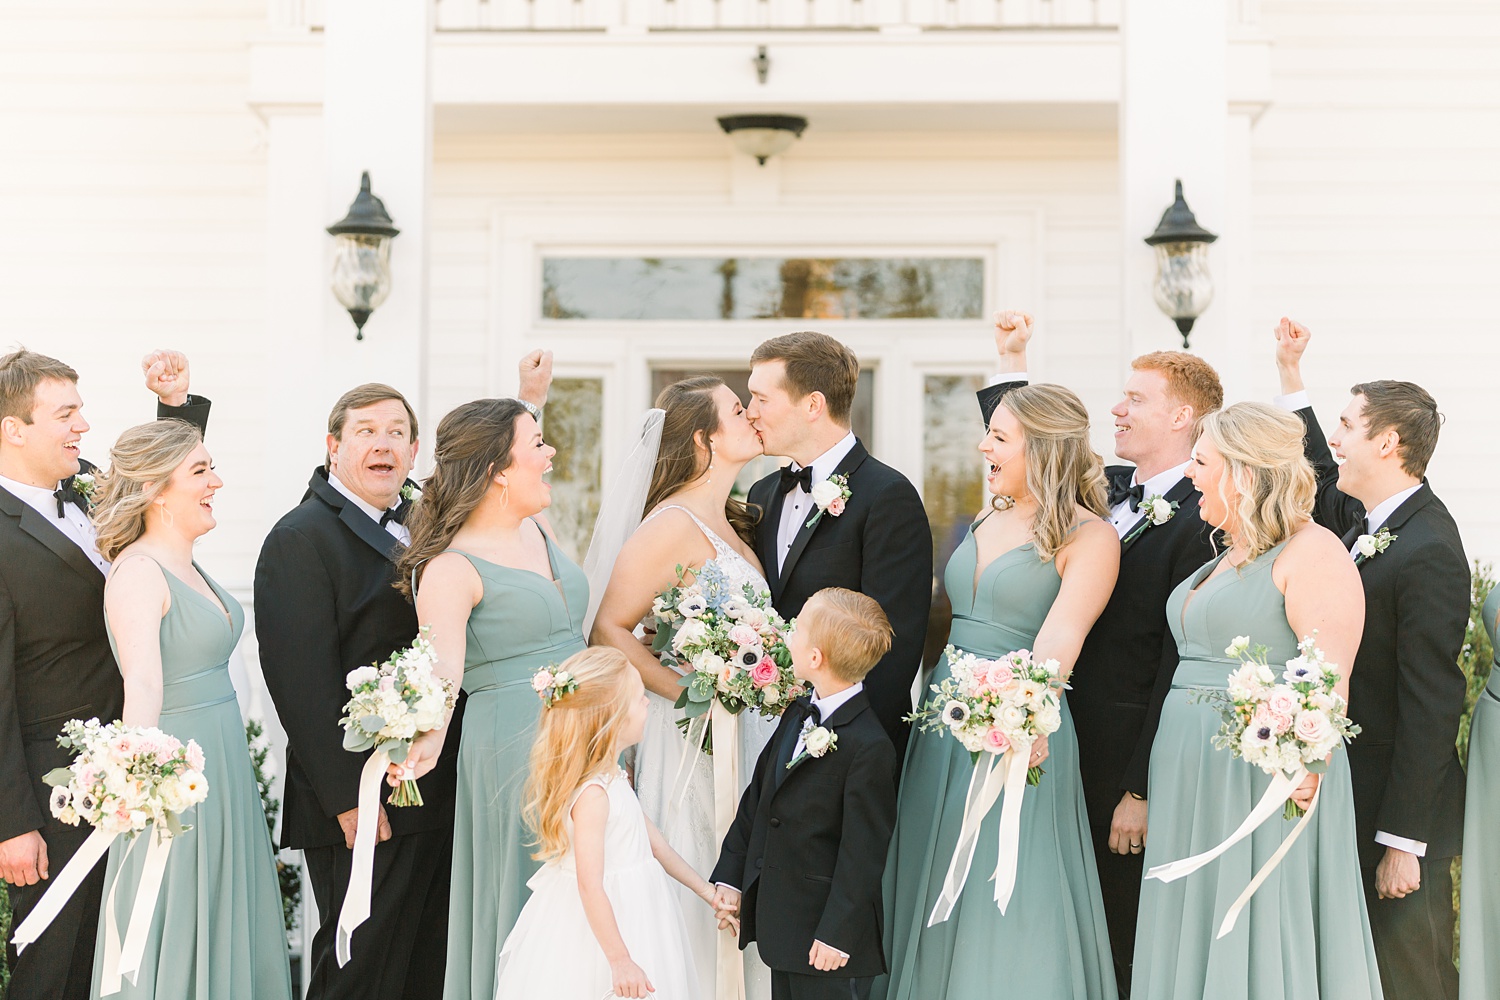 newlyweds kiss with bridal party cheering them on